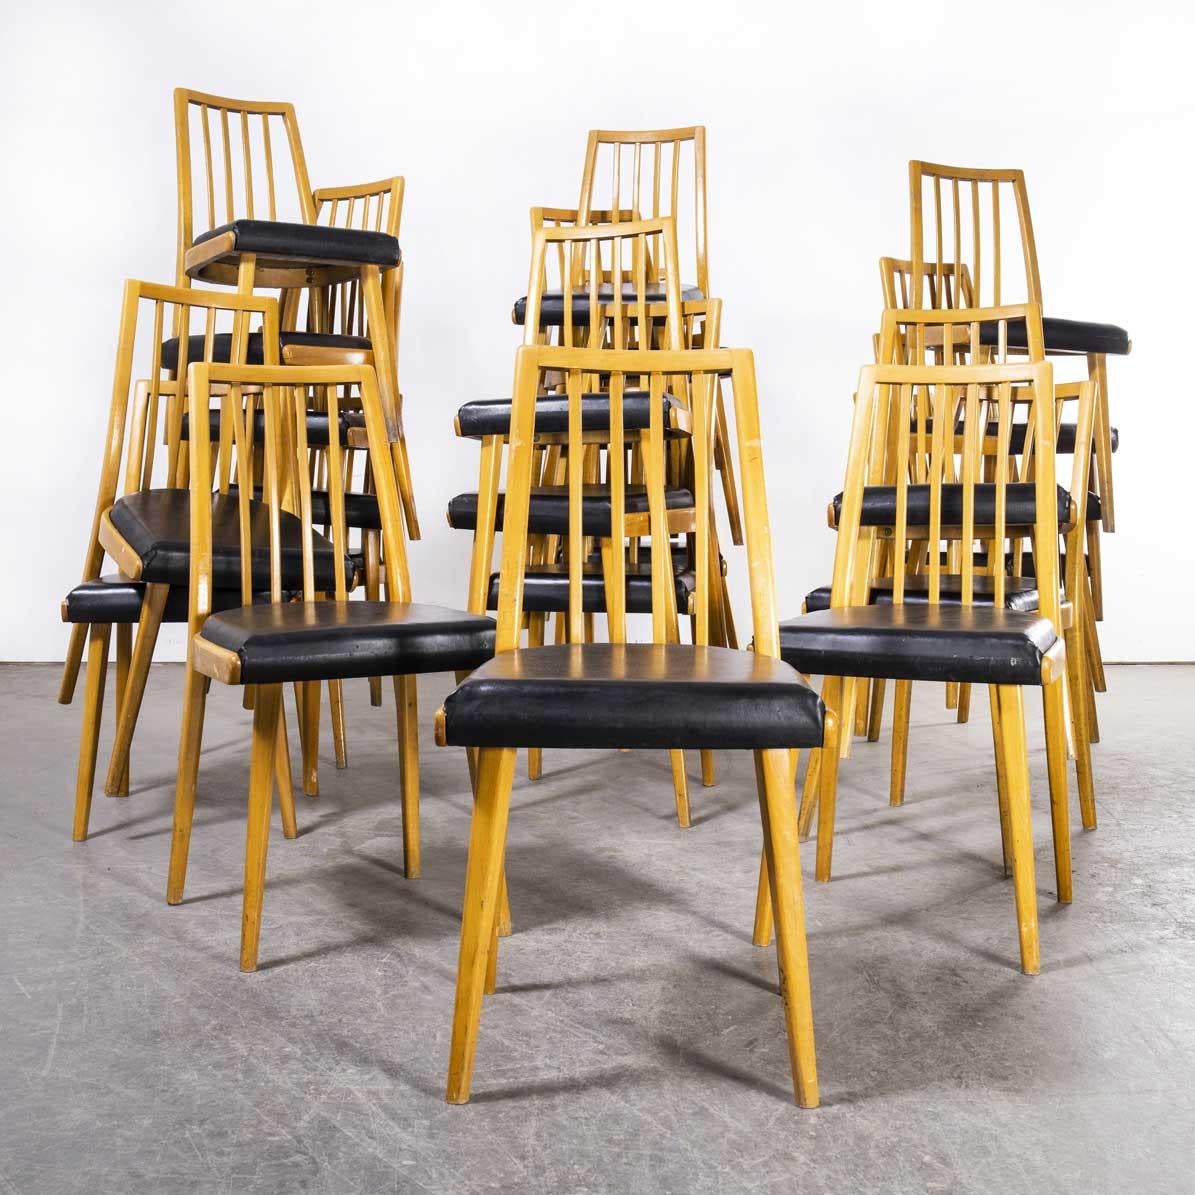 1960’s mid century upholstered dining chairs by Interier Praha – various quantities available
1960’s mid century upholstered dining chairs by Interier Praha – various quantities available. Produced by Interier Praha in the Czech Republic. Czech was